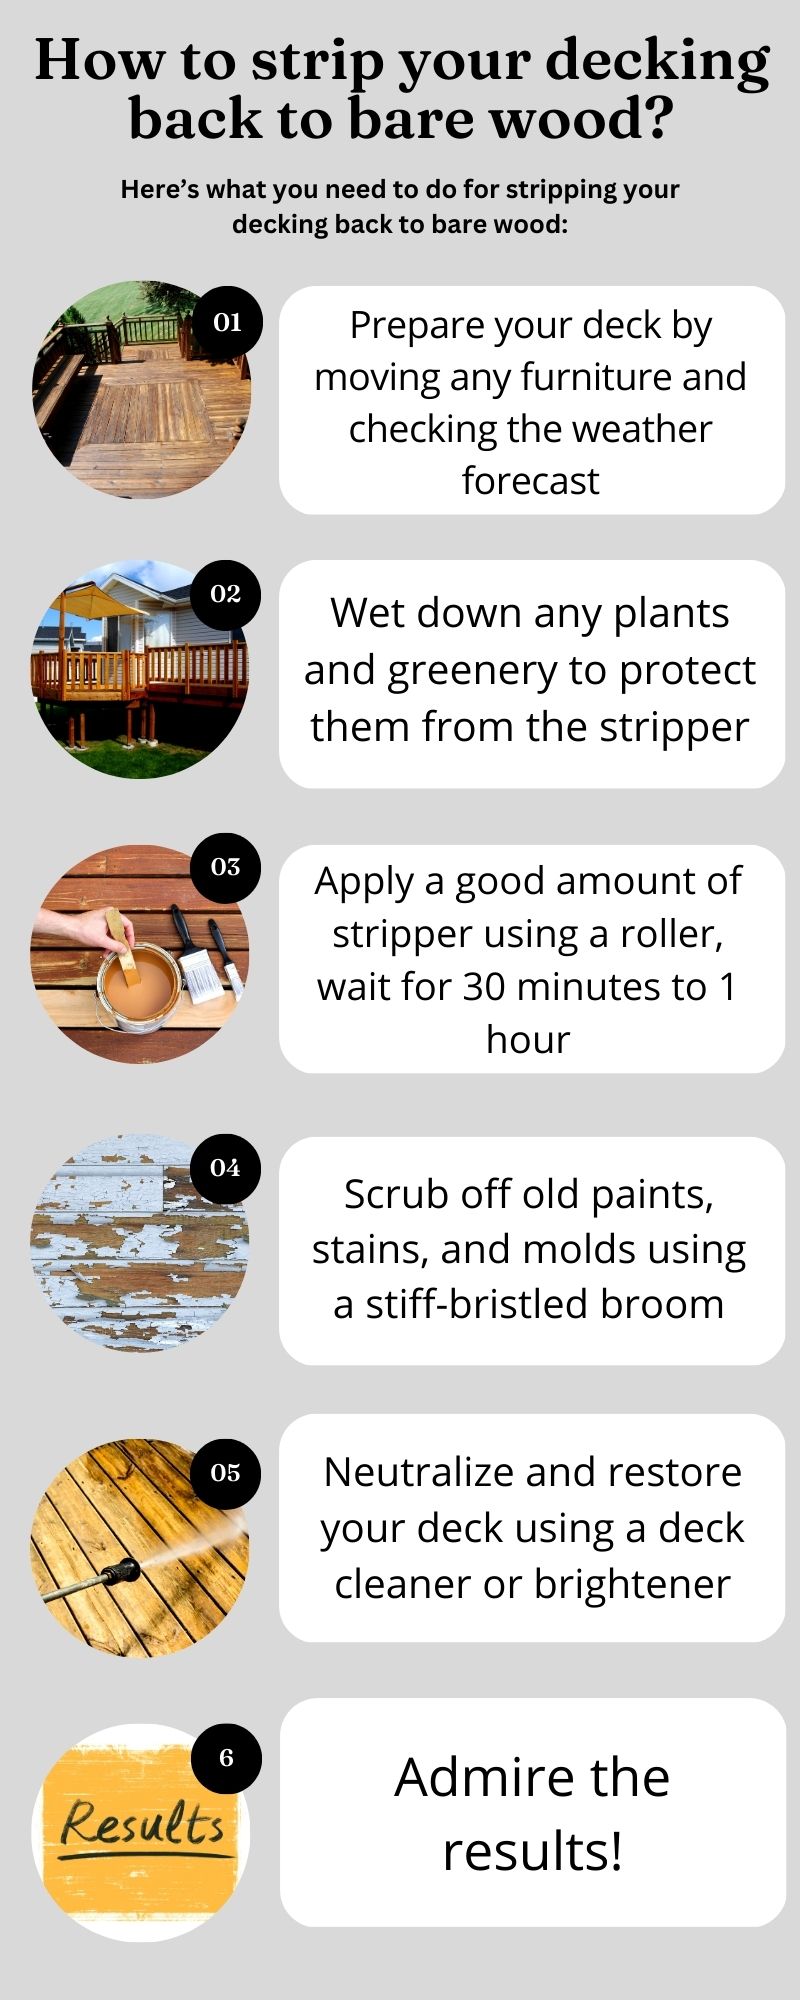 How to strip your decking back to bare wood?